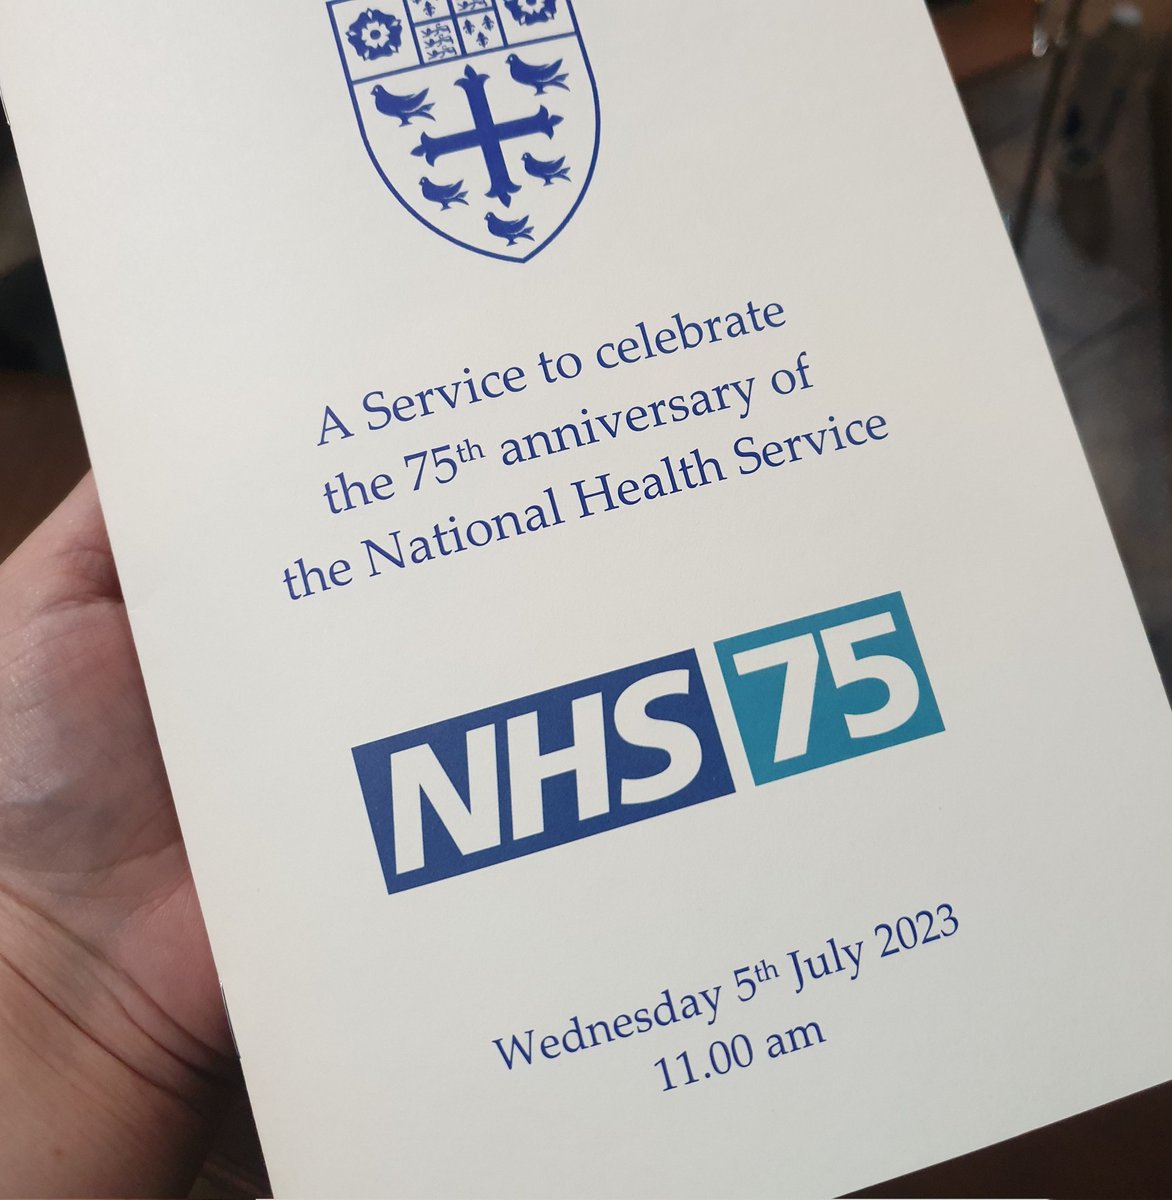 Such a lovely event with our NHS Cadets and volunteers celebrating #NHS75, and all the people who make it, at Westminster Abbey today.

A particularly proud moment watching our brilliant Cadet of the Year @Kyle_NCOTY help lead the procession 💚